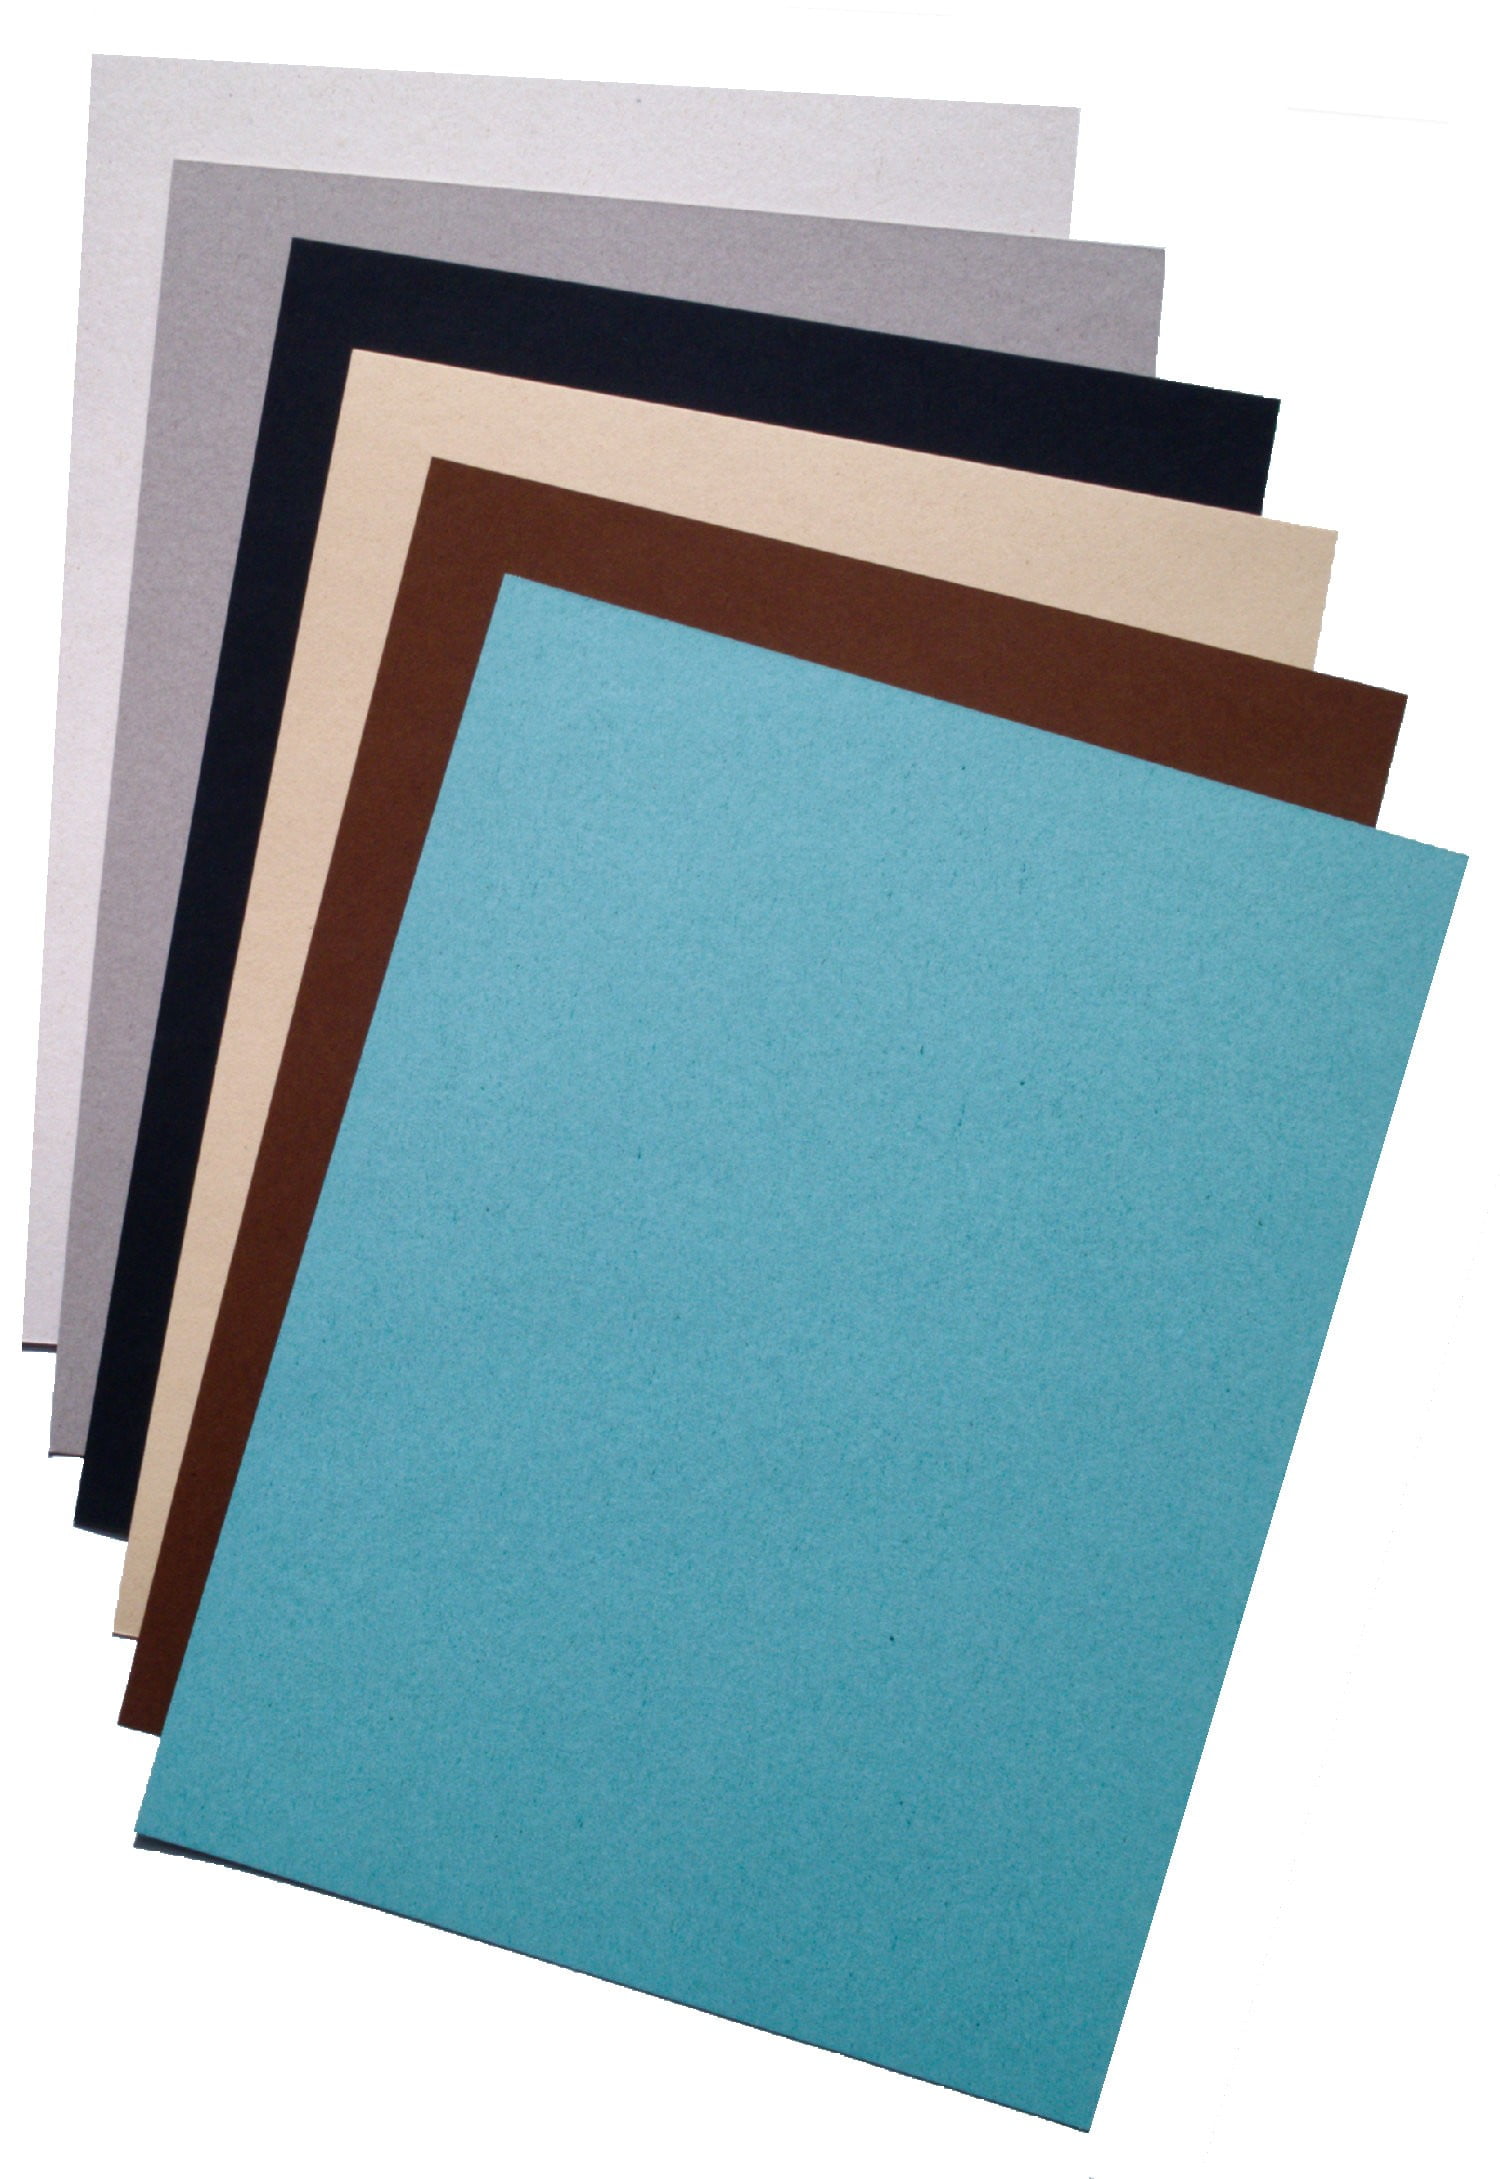 REMAKE Blue Sky - 8.5X14 Card Stock Paper - 140lb Cover (380gsm) - 100 PK  [dd]